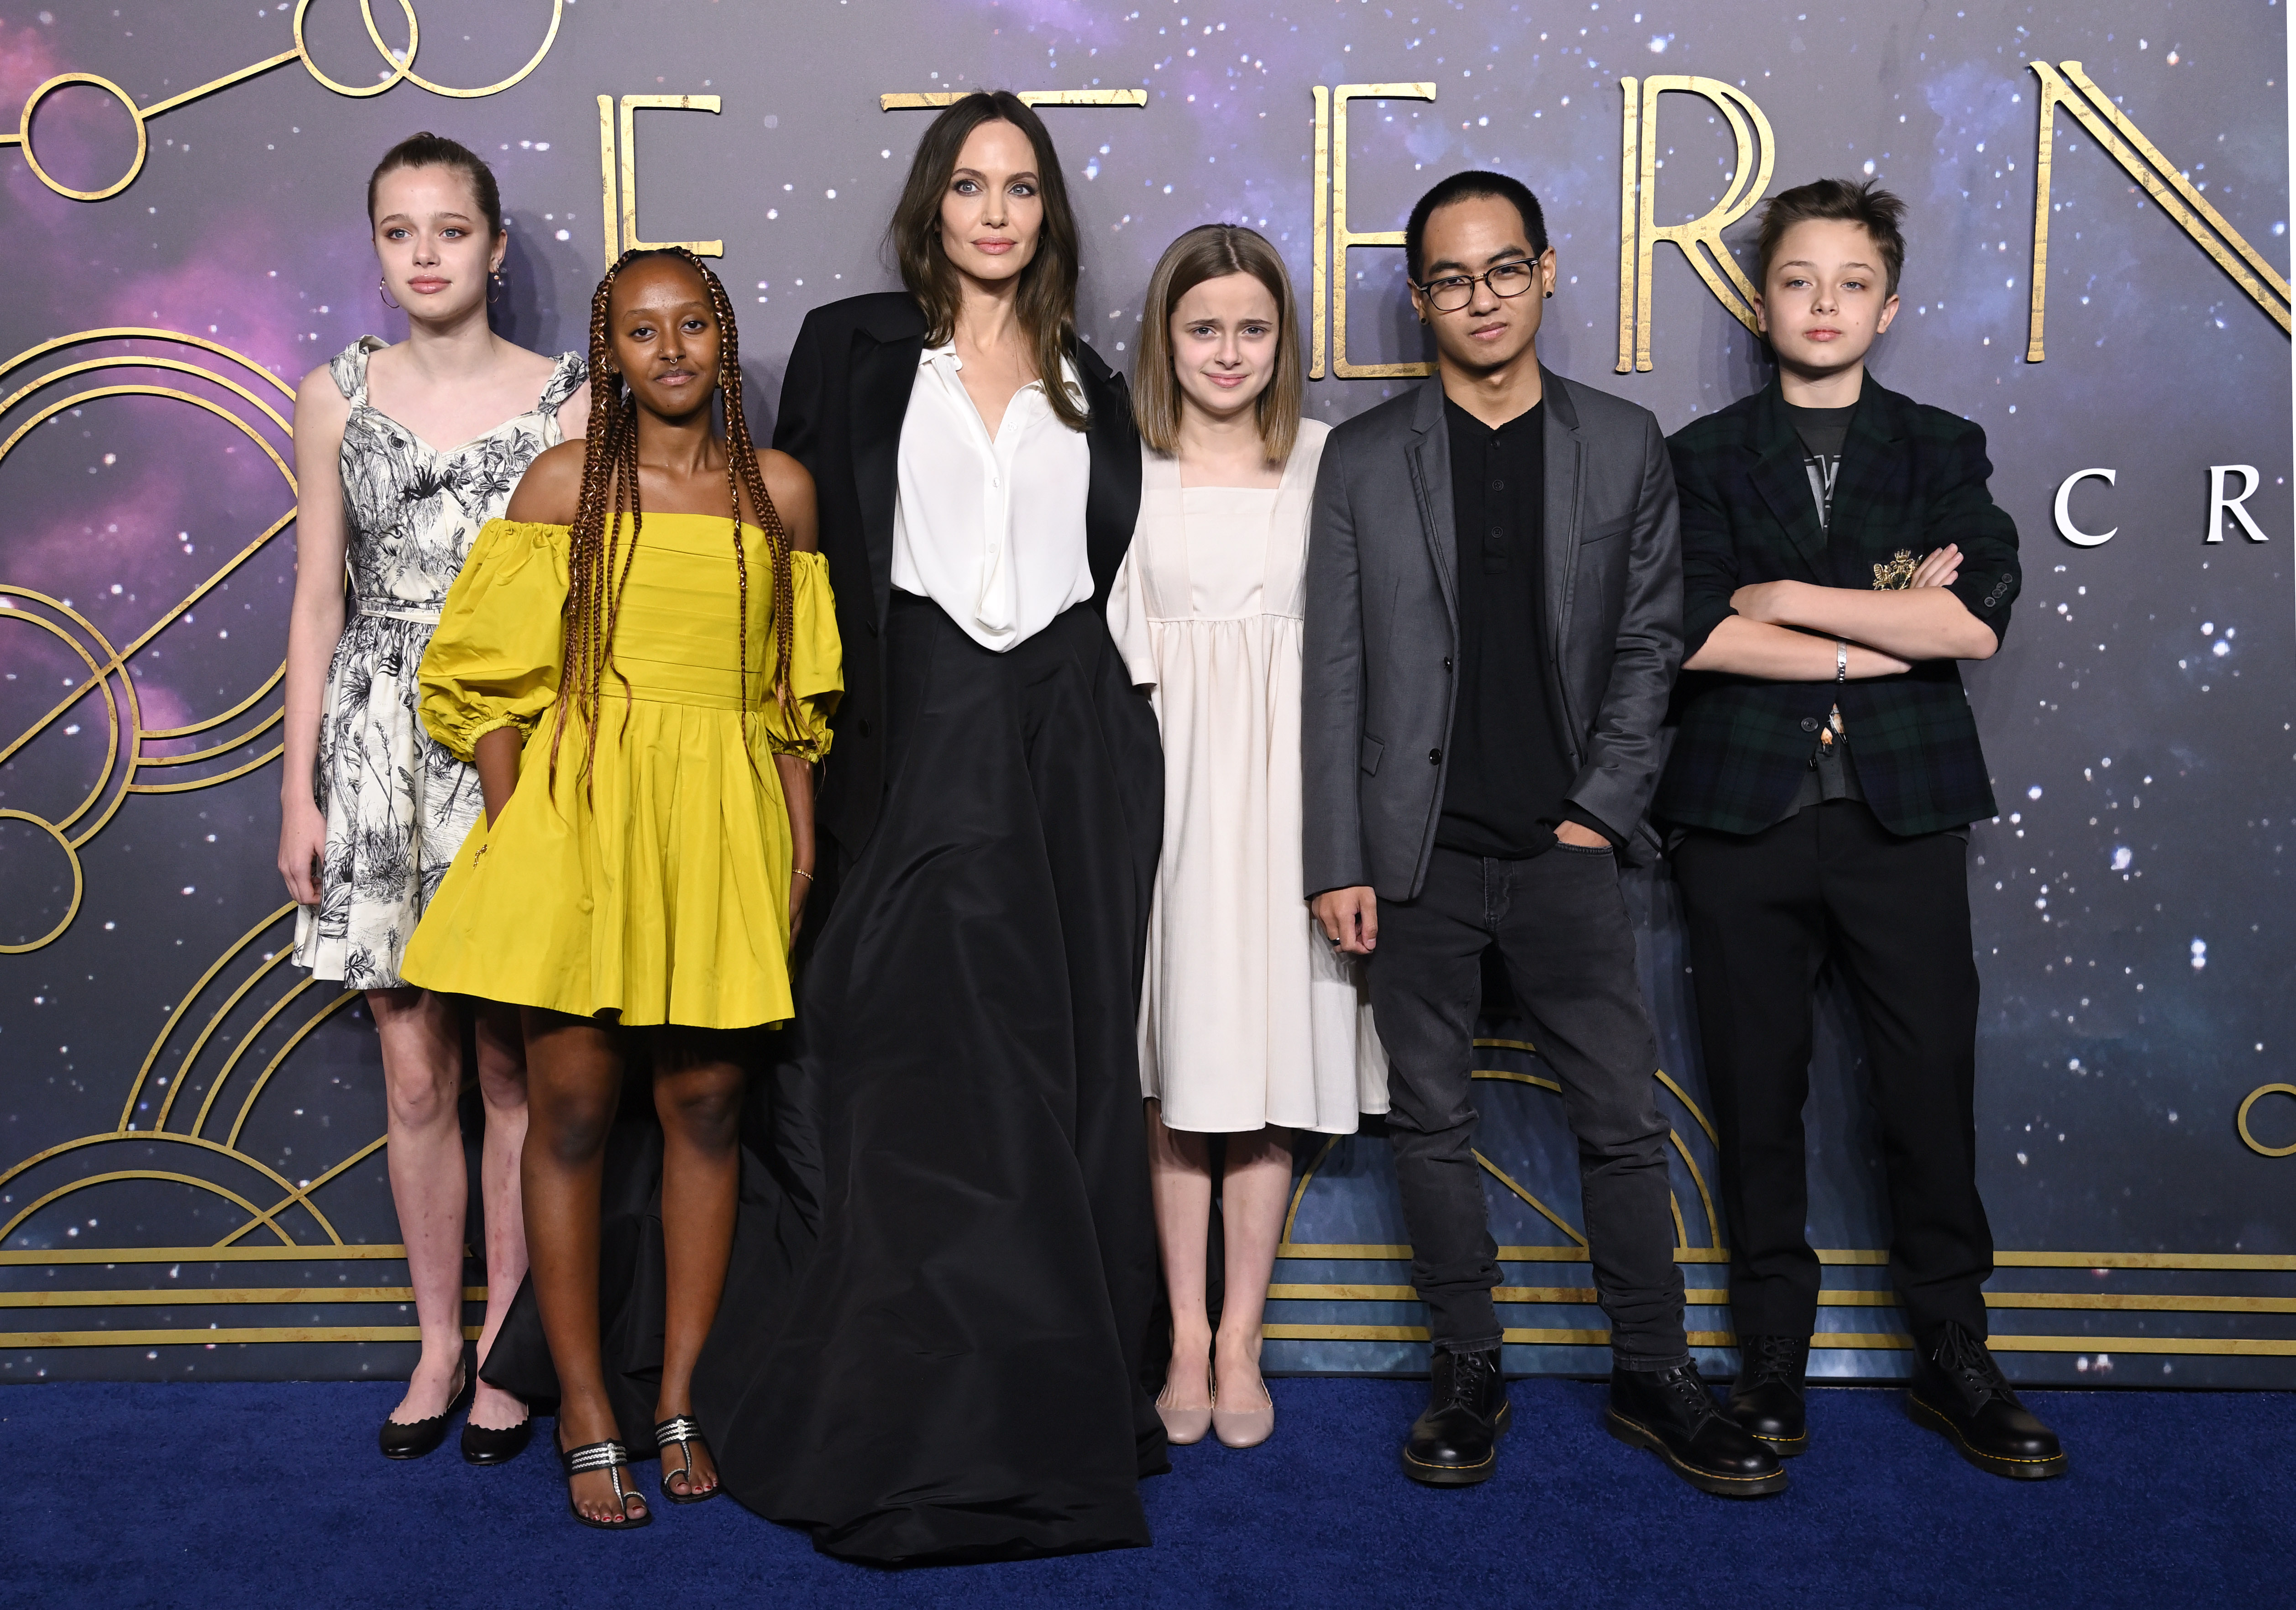 Angelina Jolie with her children  Vivienne, Maddox, Knox, Shiloh, and Zahara in London, in 2021. | Source: Getty Images